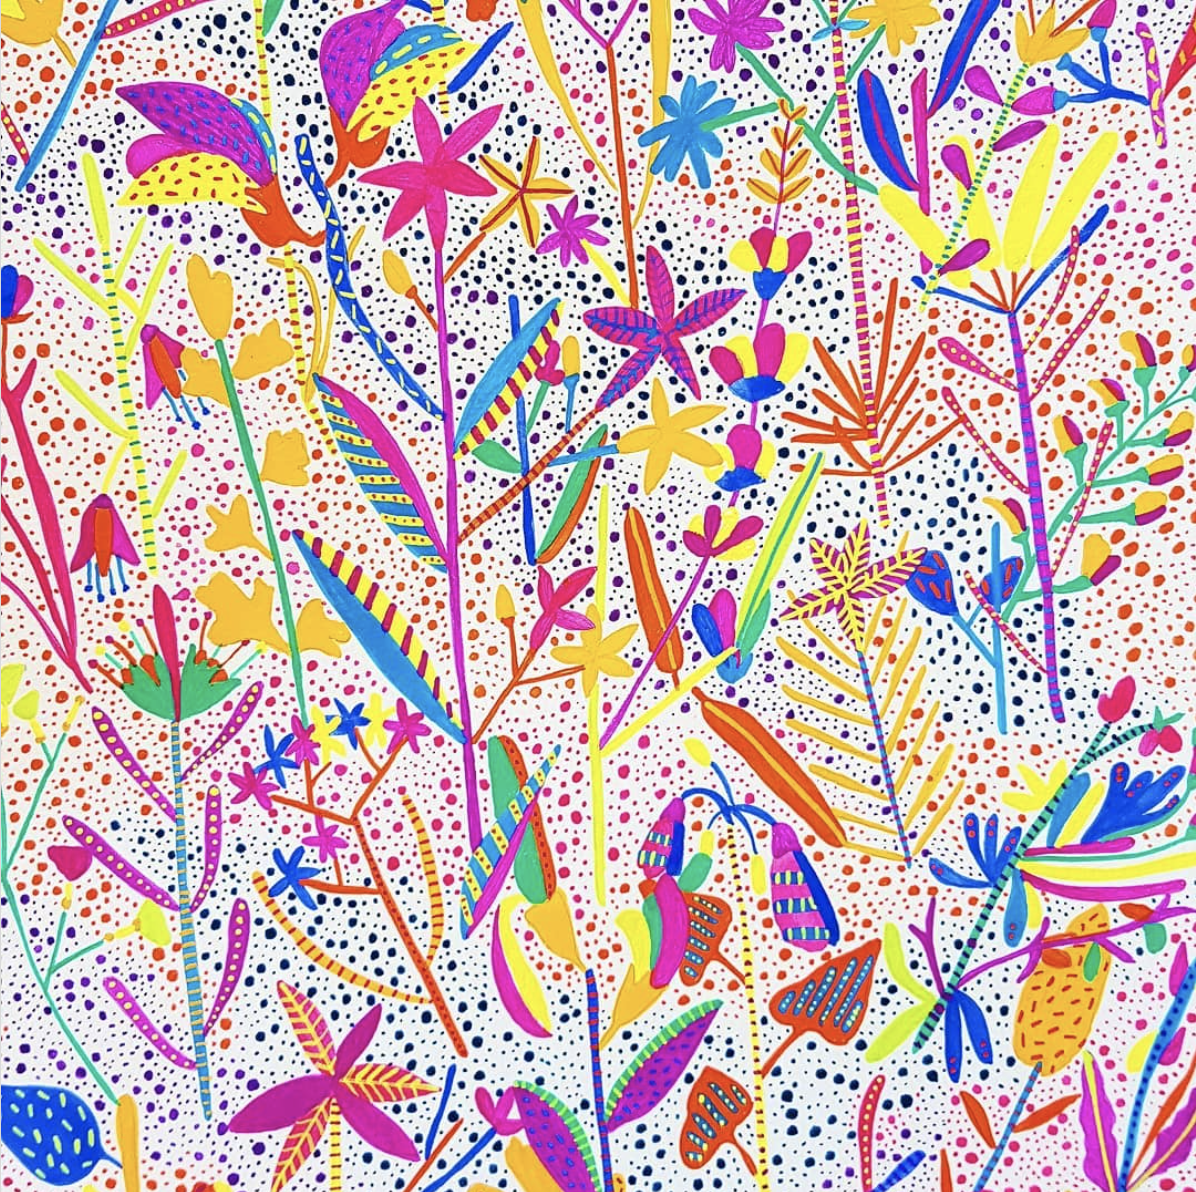 A colourful, floral design, in a marker style.